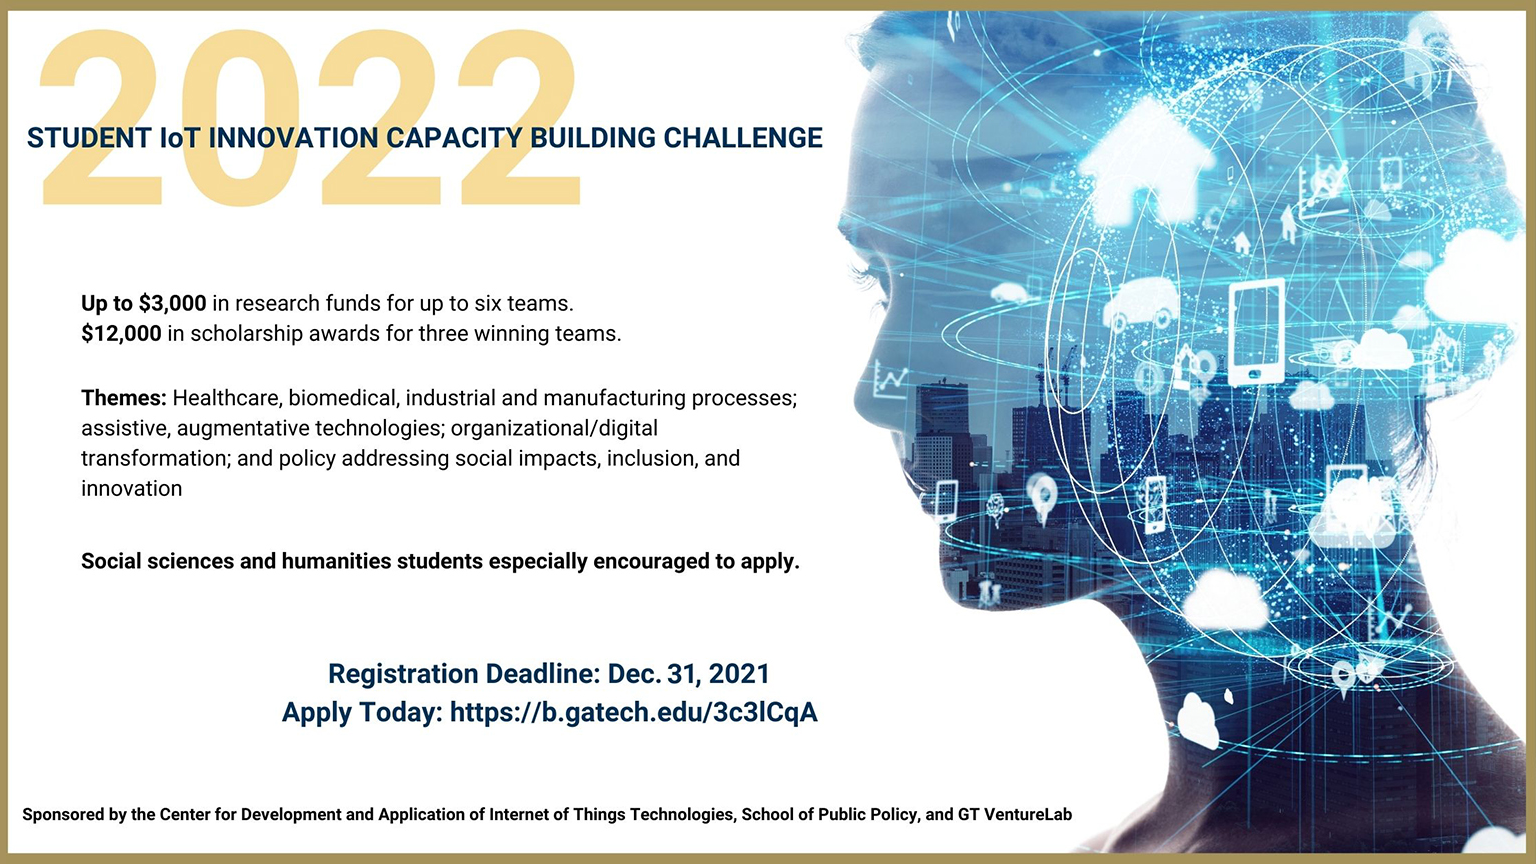  2022 Student IoT Innovation Capacity Building Challenge